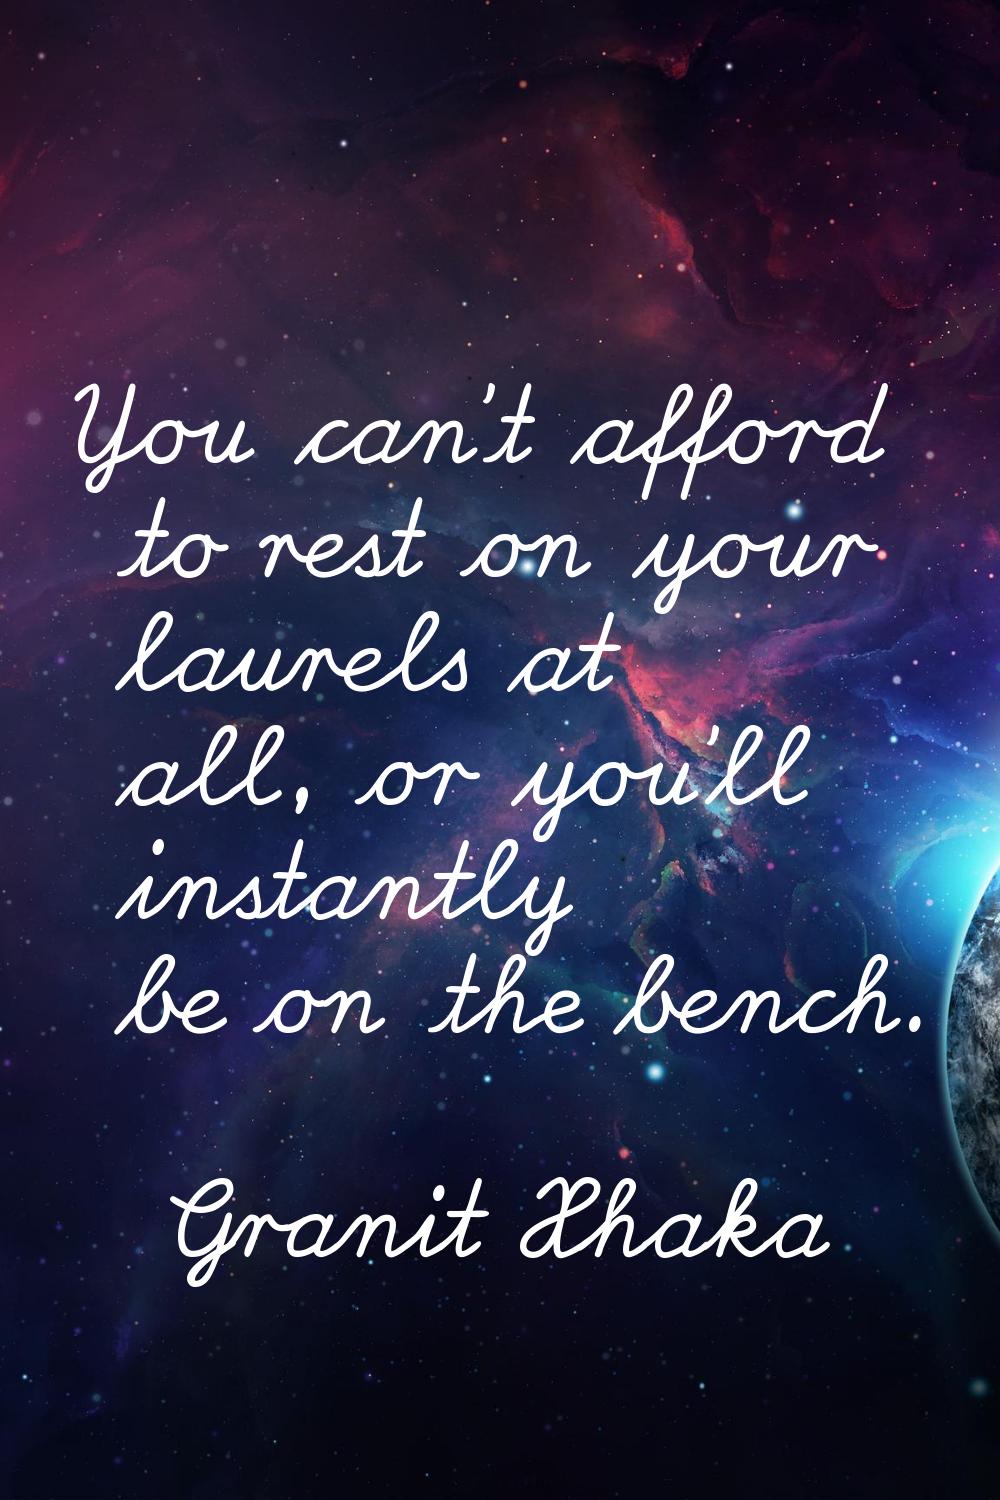 You can't afford to rest on your laurels at all, or you'll instantly be on the bench.